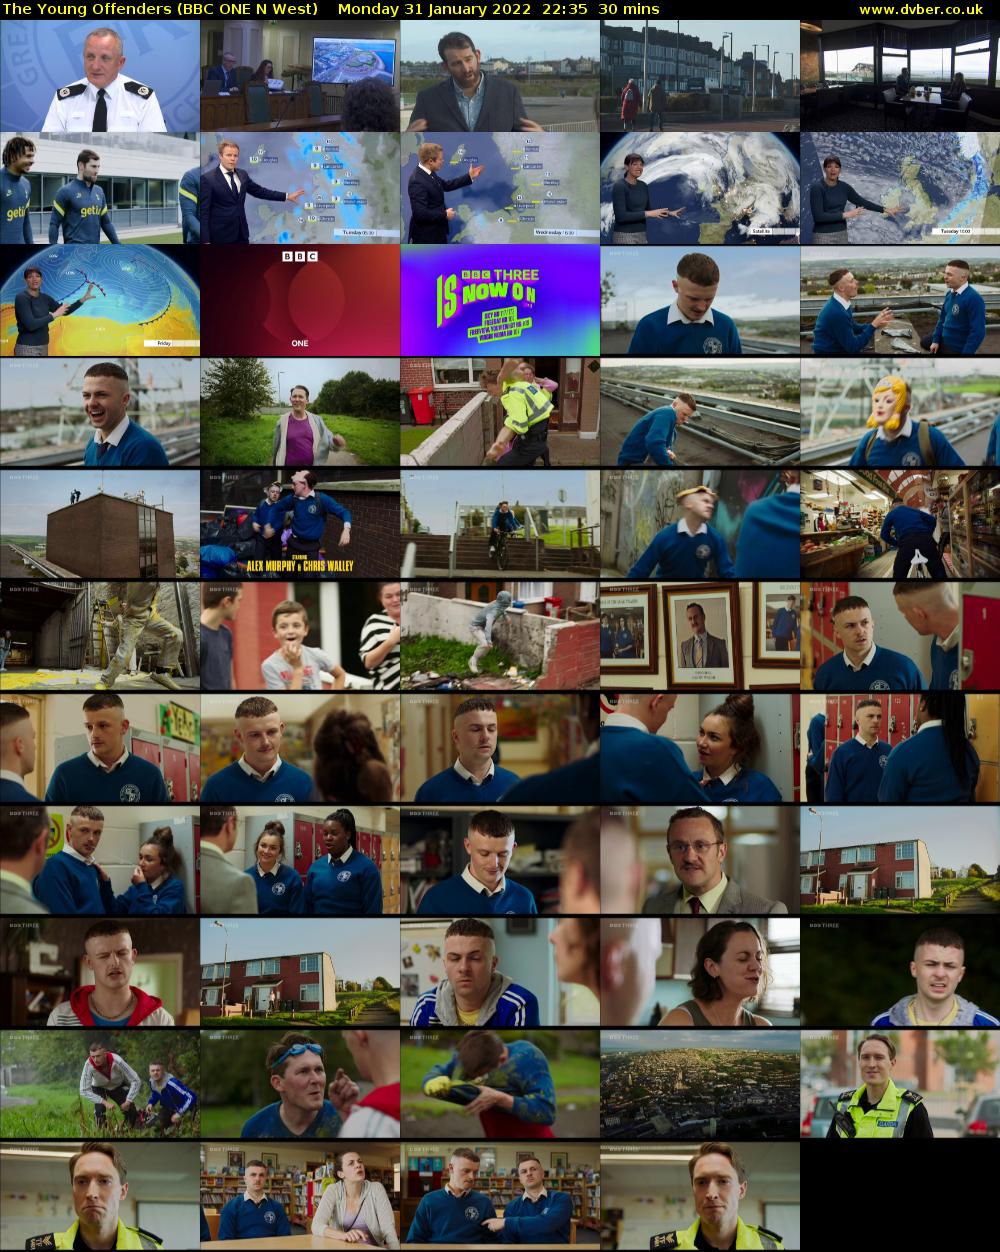 The Young Offenders (BBC ONE N West) Monday 31 January 2022 22:35 - 23:05